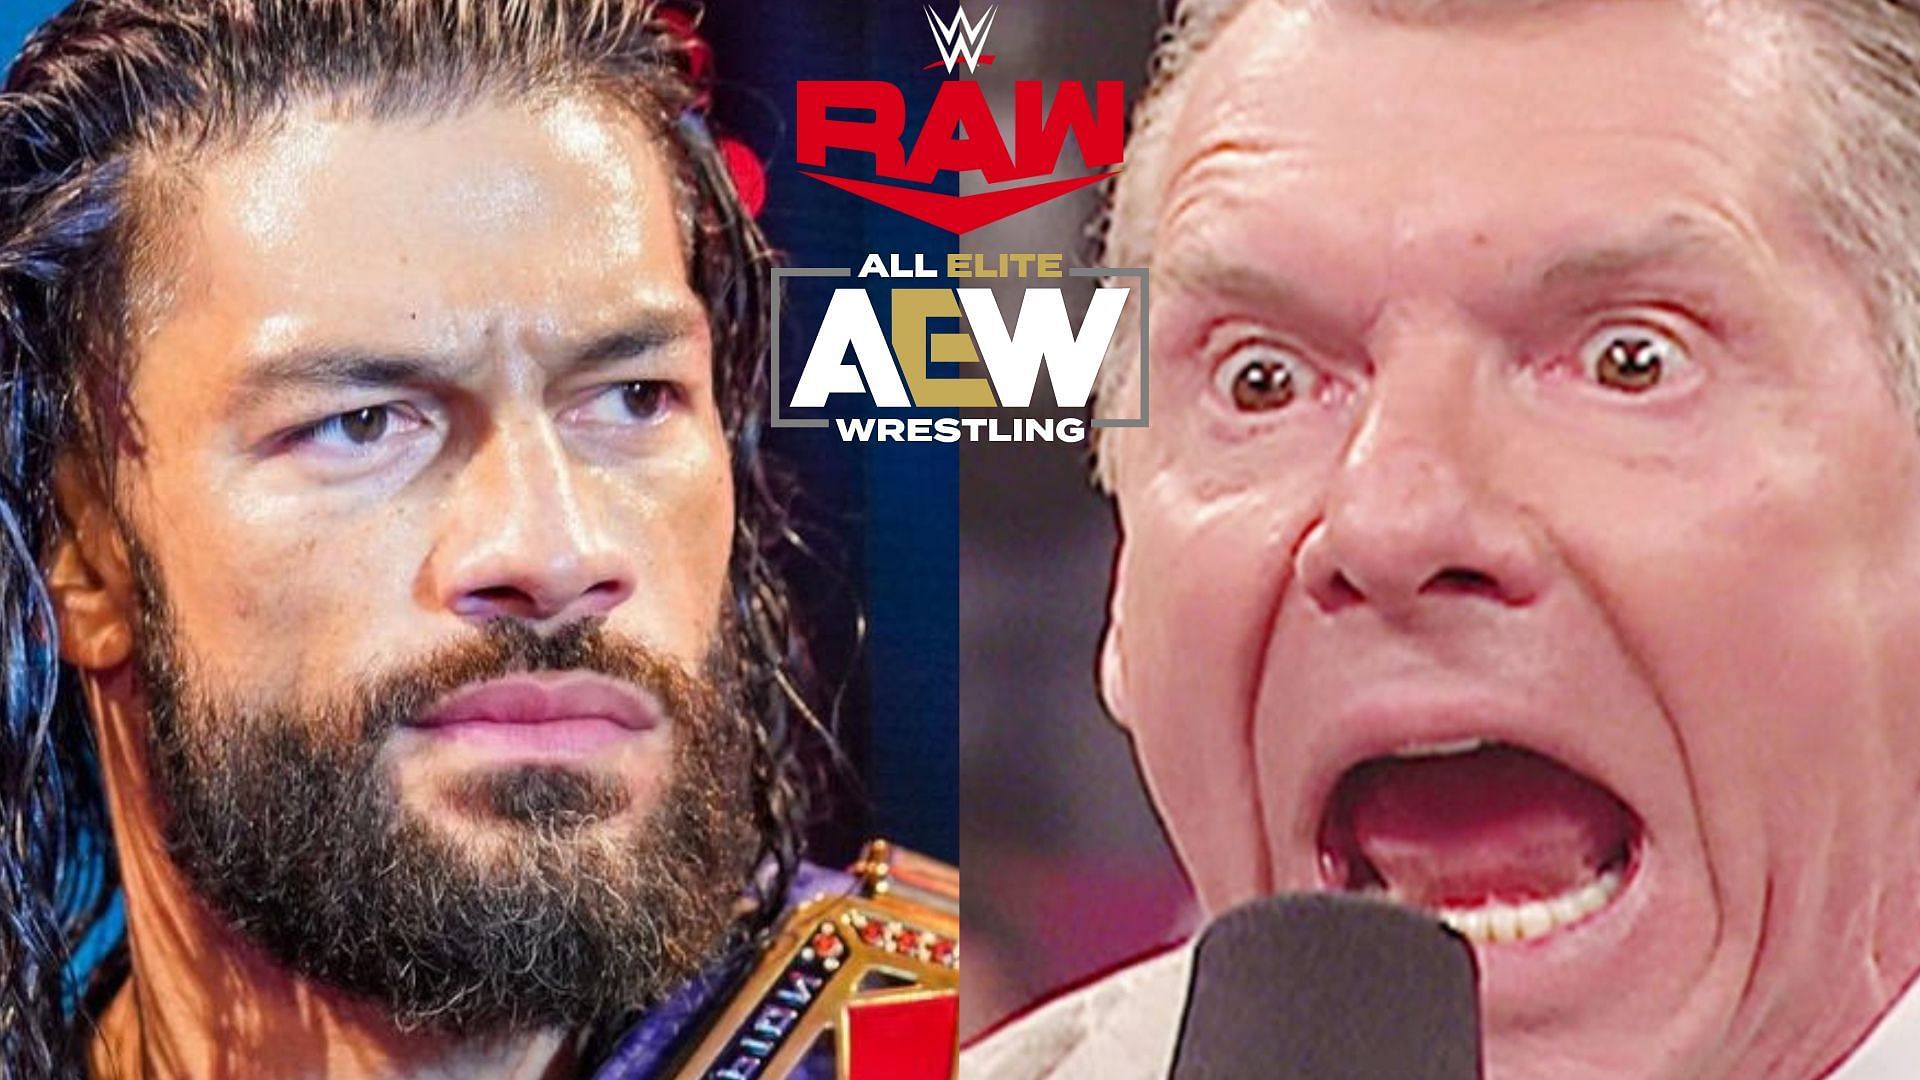 Would Vince McMahon have let Roman Reigns reference AEW?